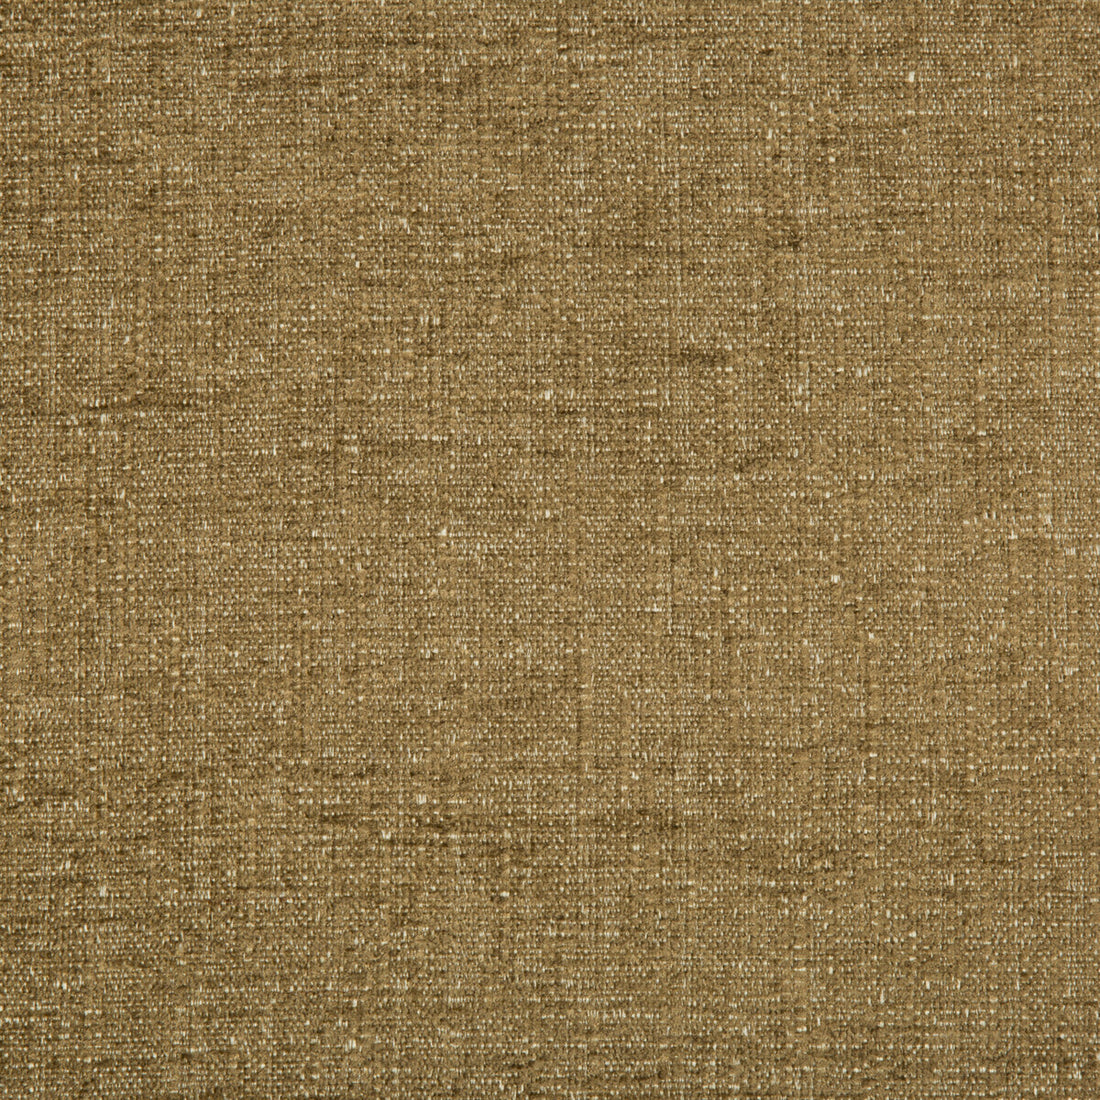 Kravet Smart fabric in 34622-6 color - pattern 34622.6.0 - by Kravet Smart in the Performance Crypton Home collection